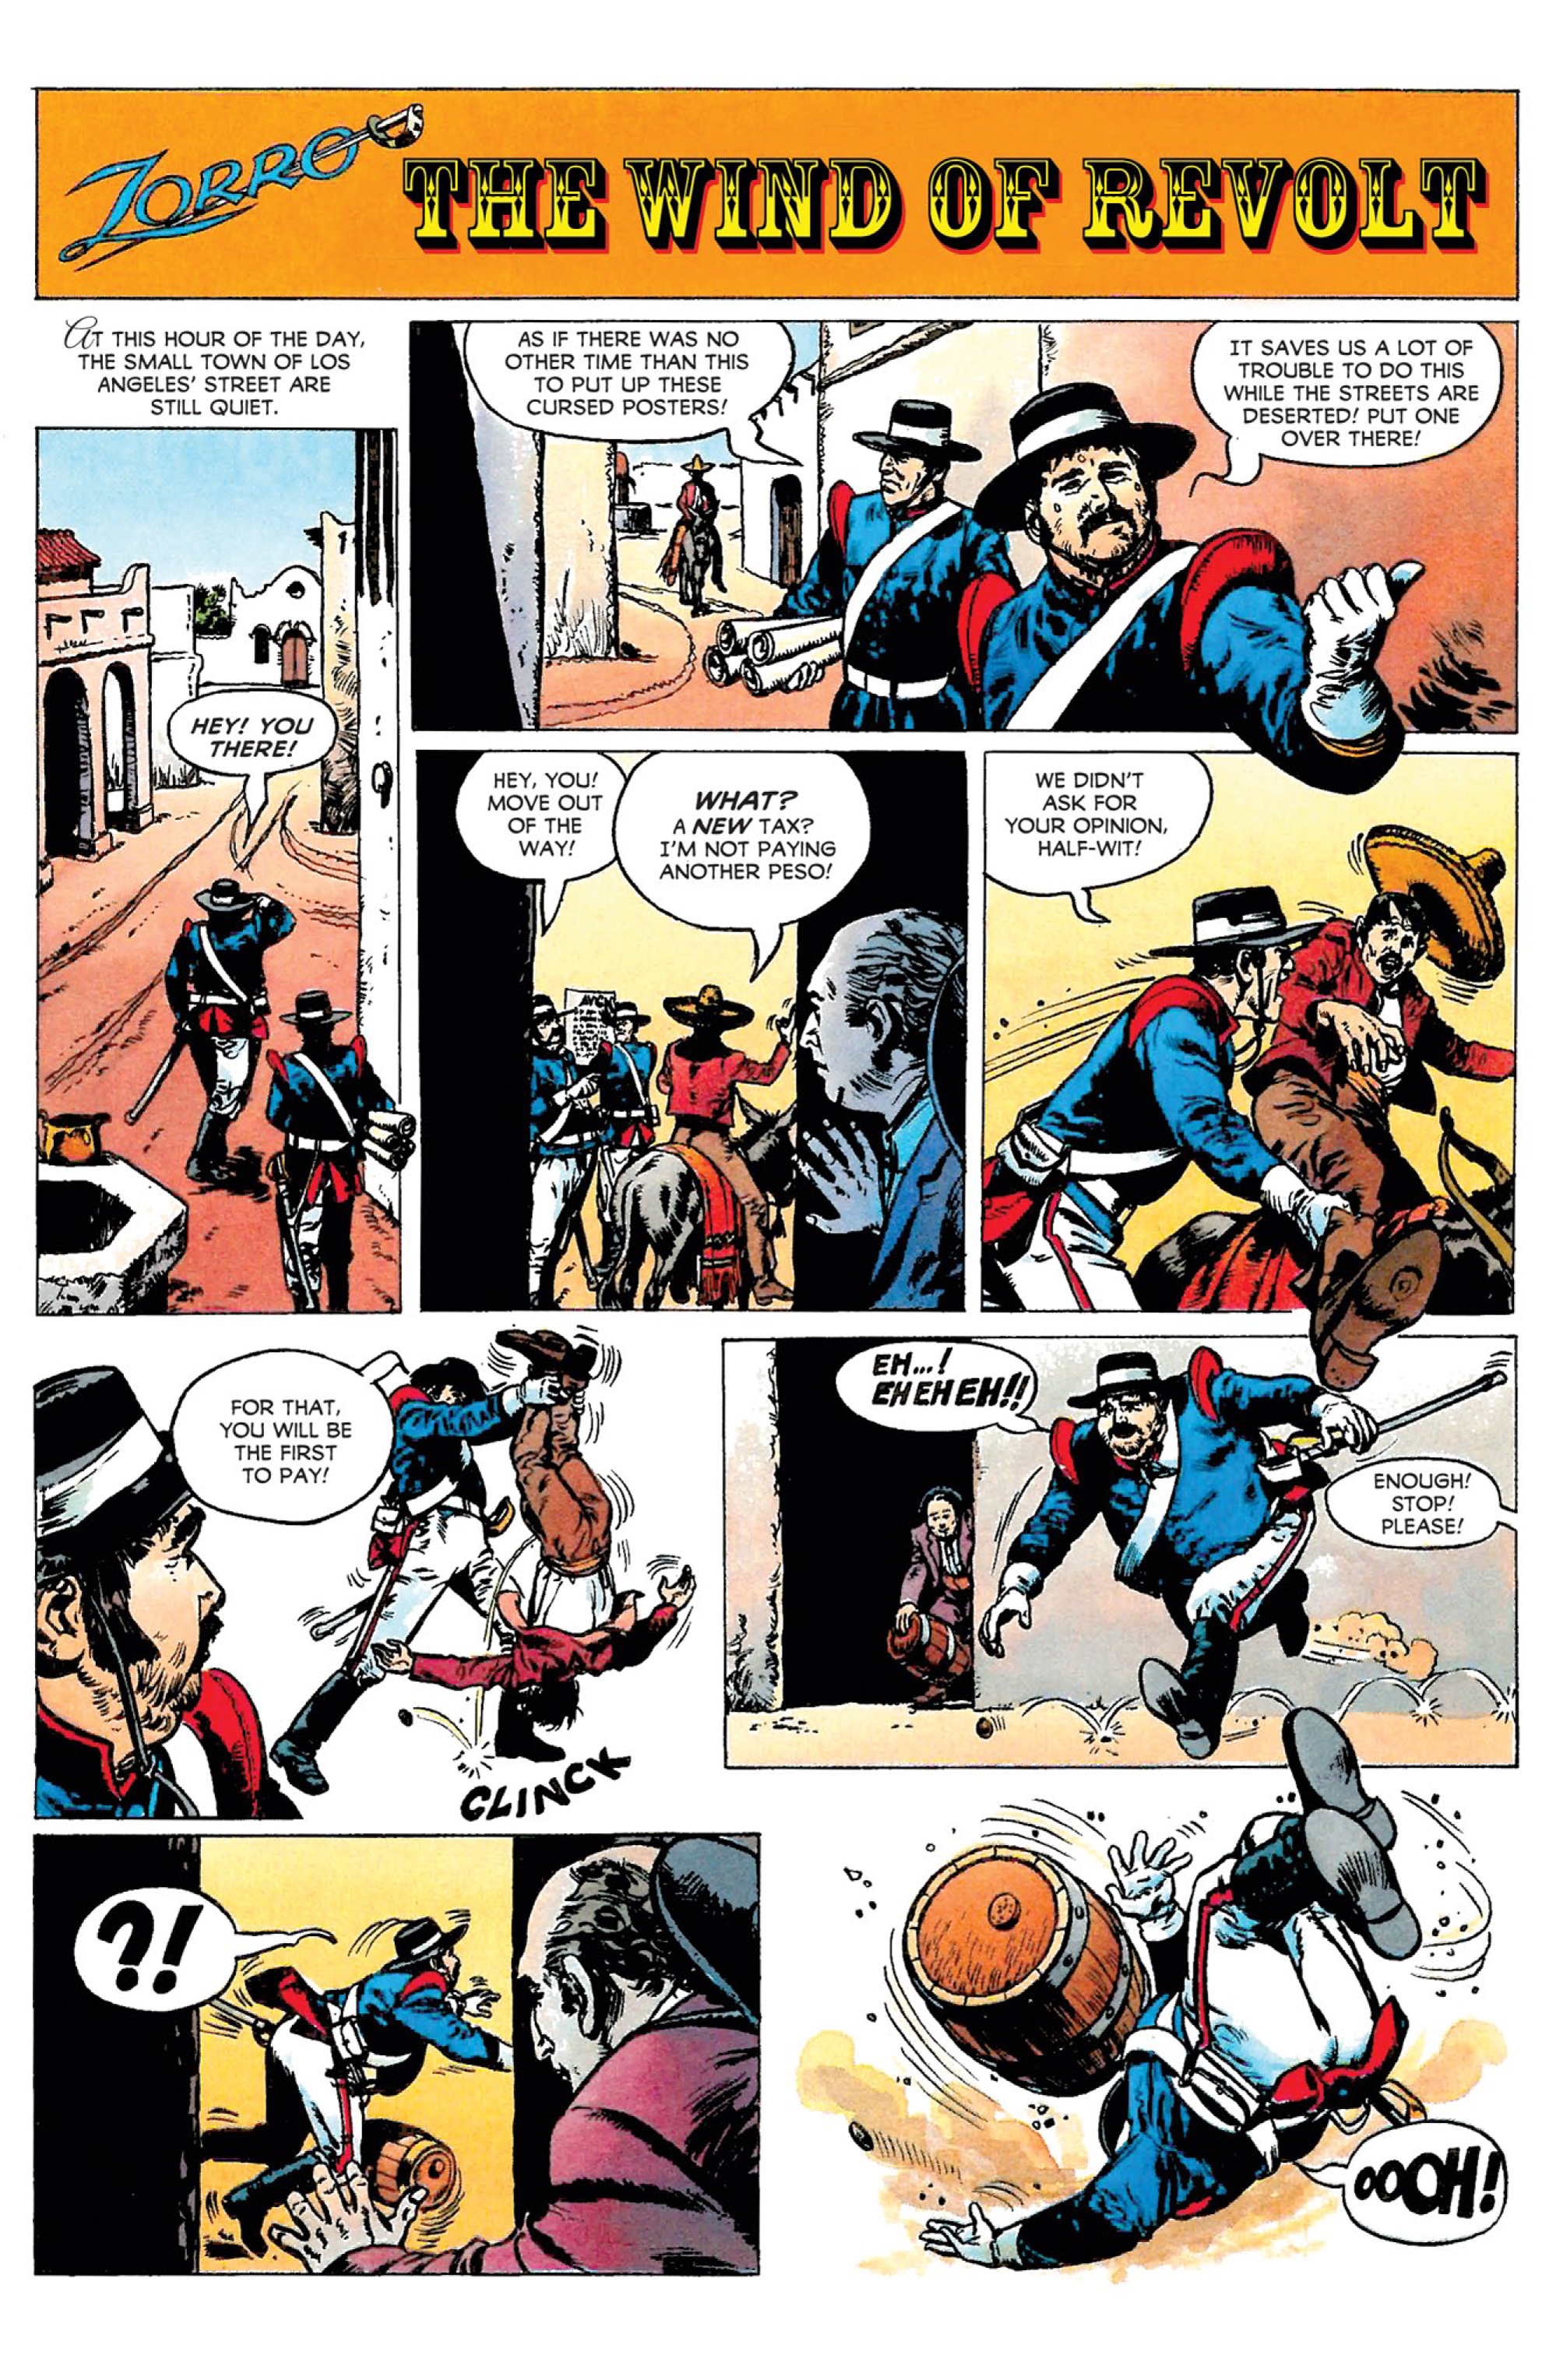 Zorro: Legendary Adventures Book 2 (2019): Chapter 4 - Page 3